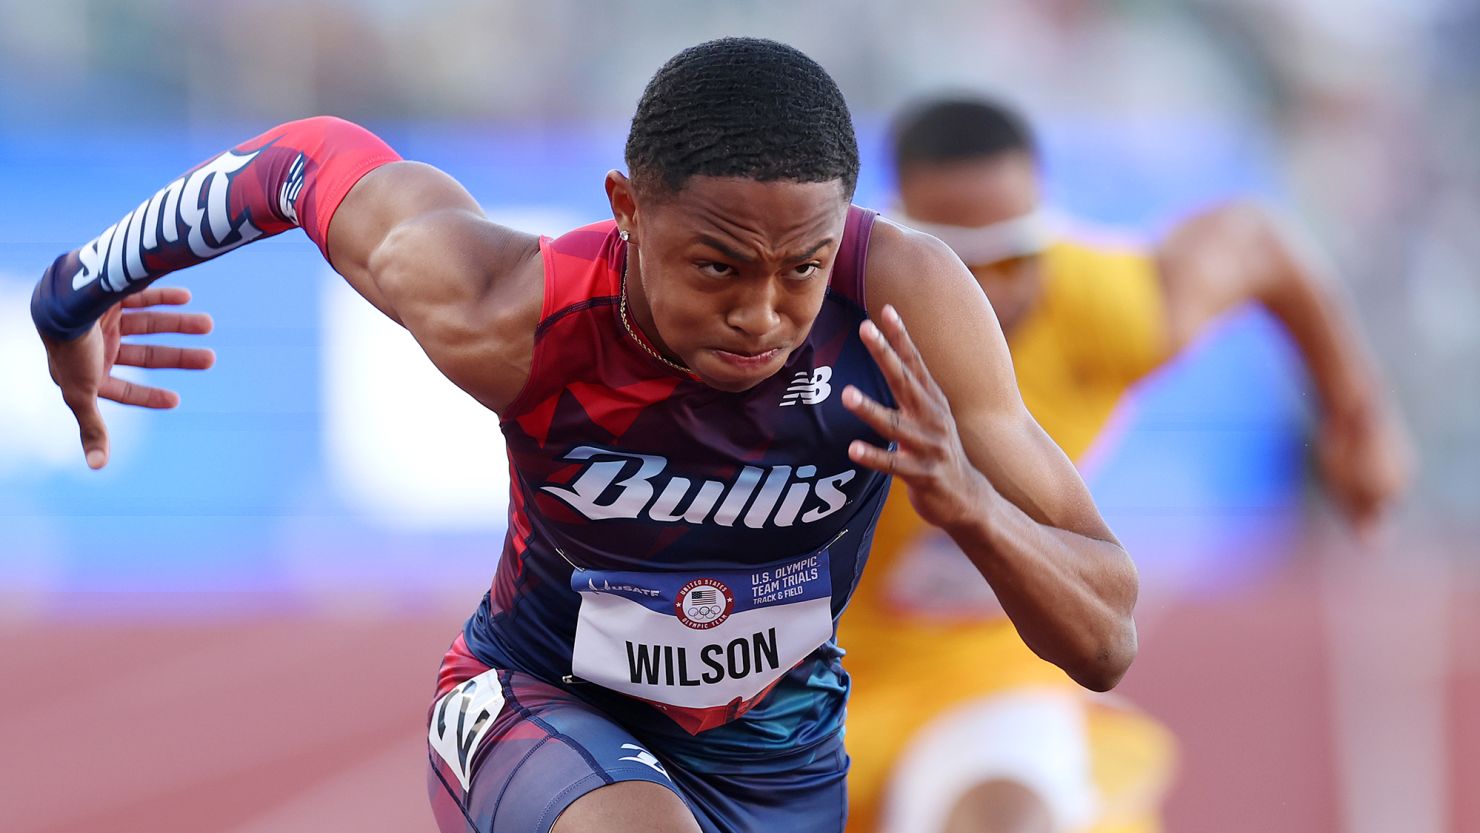 Quincy Wilson, 16, is fast becoming a rising star in the world of athletics.